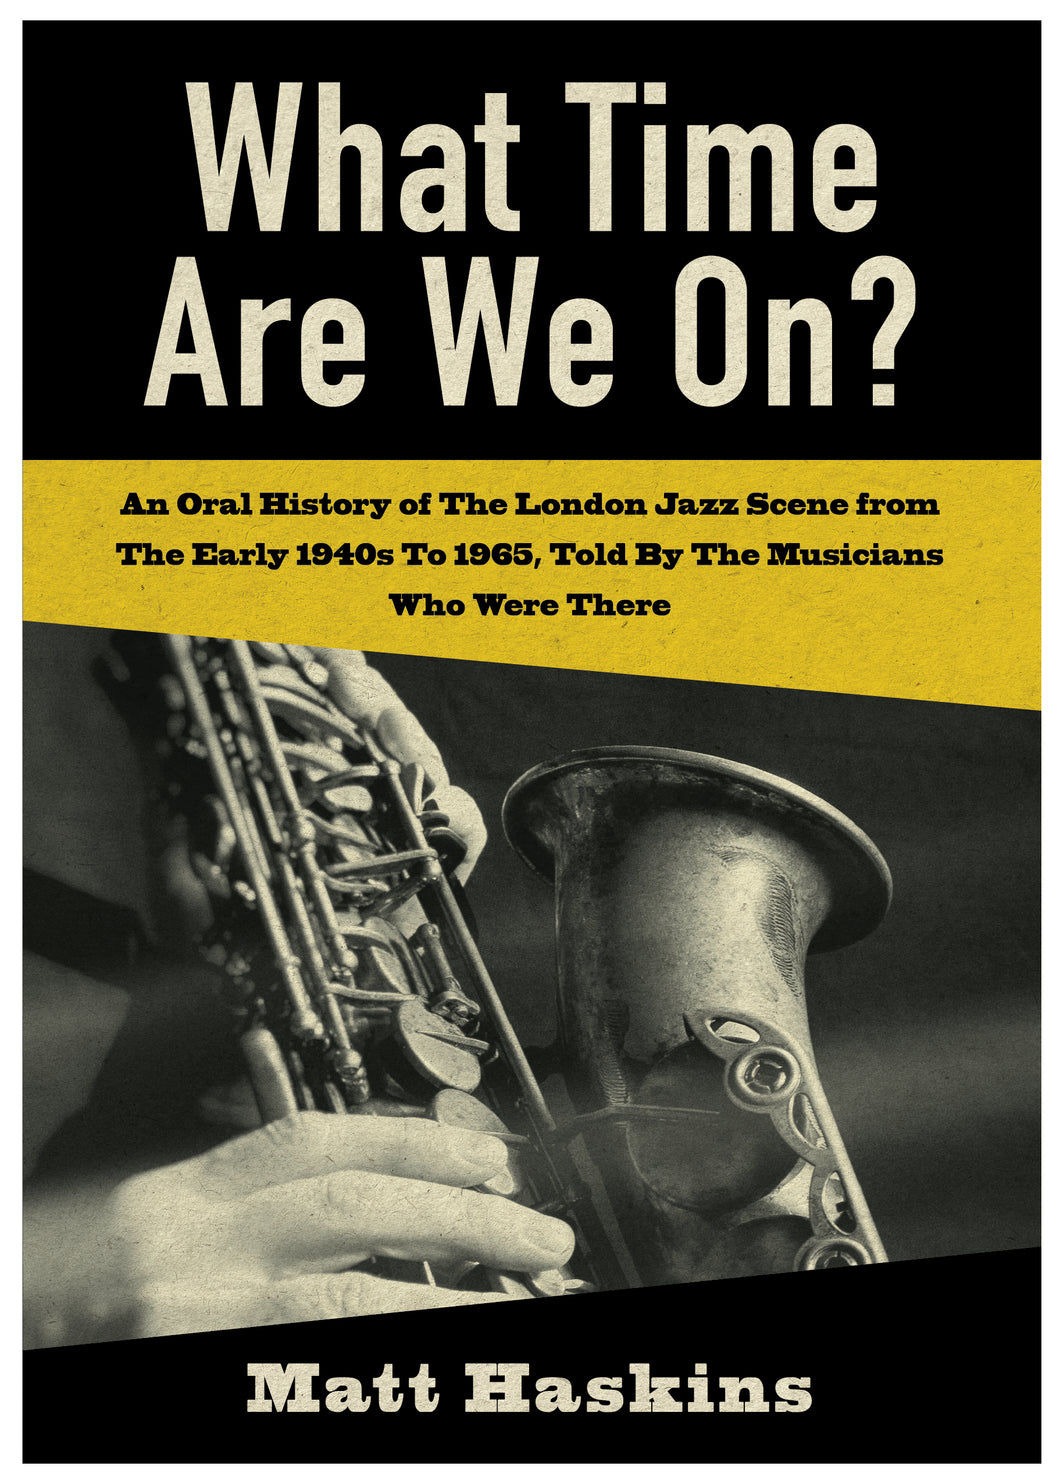 What Time Are We On? - An Oral History of The London Jazz Scene from The Early 1940's to 1965, Told By The Musicians Who Were There - Matt Haskins